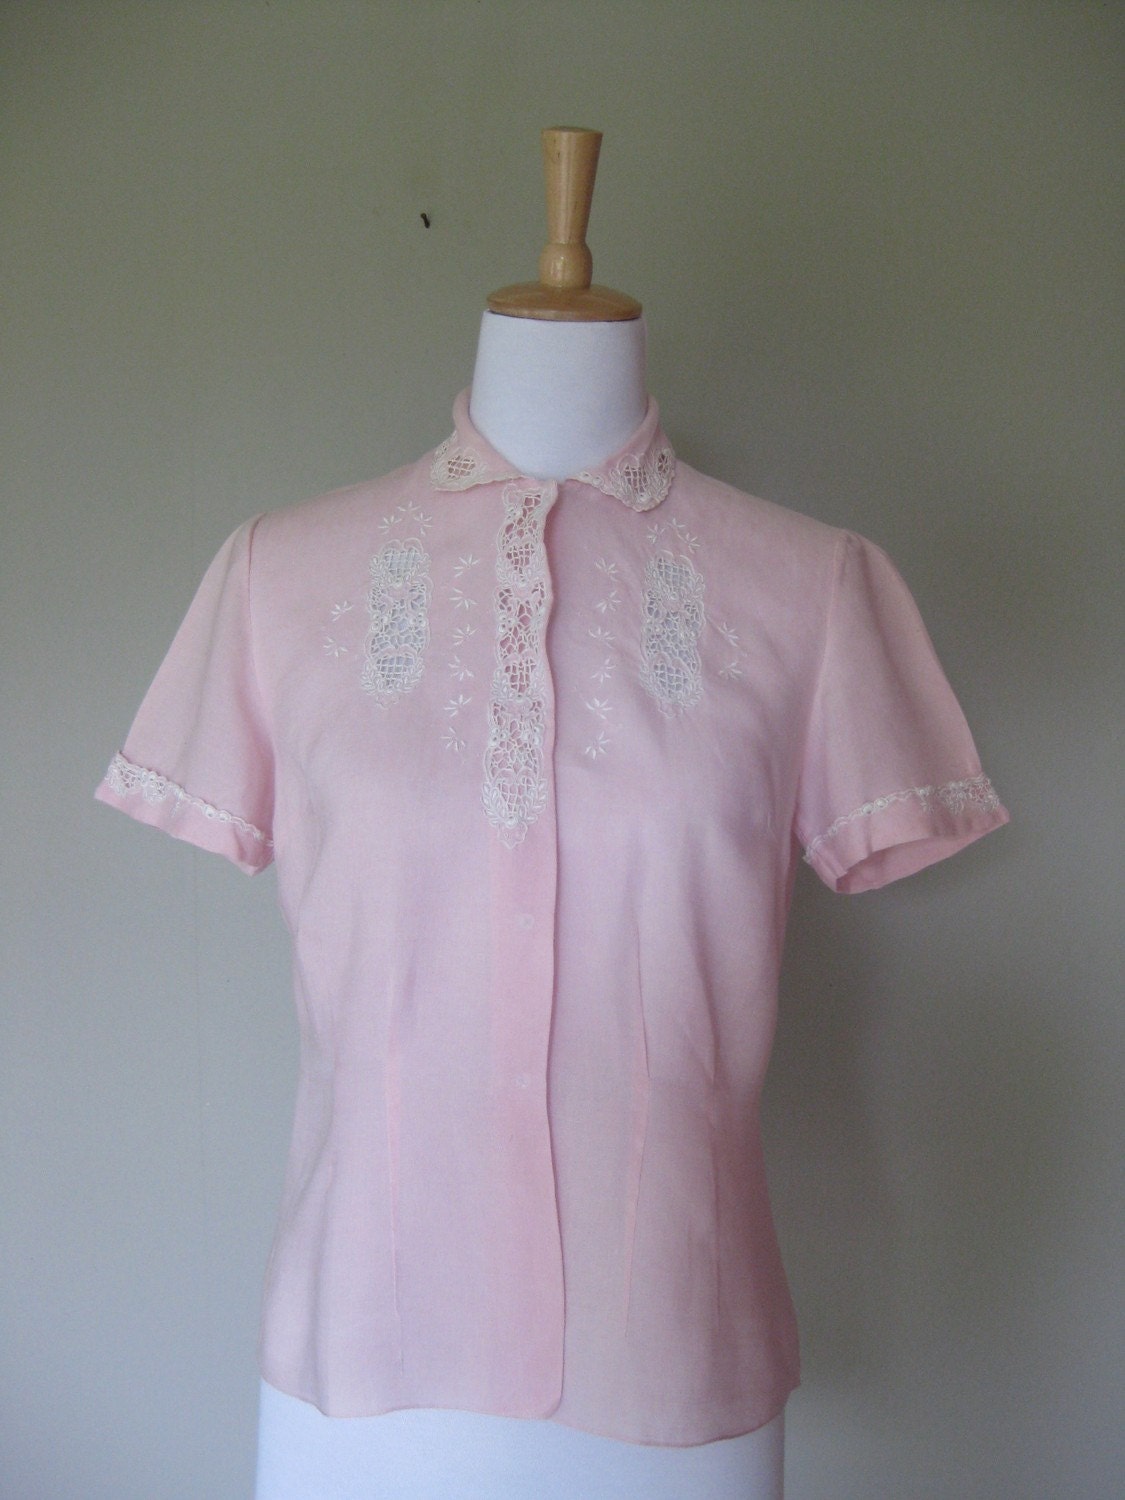 Vintage 1950's Embroidered Blouse